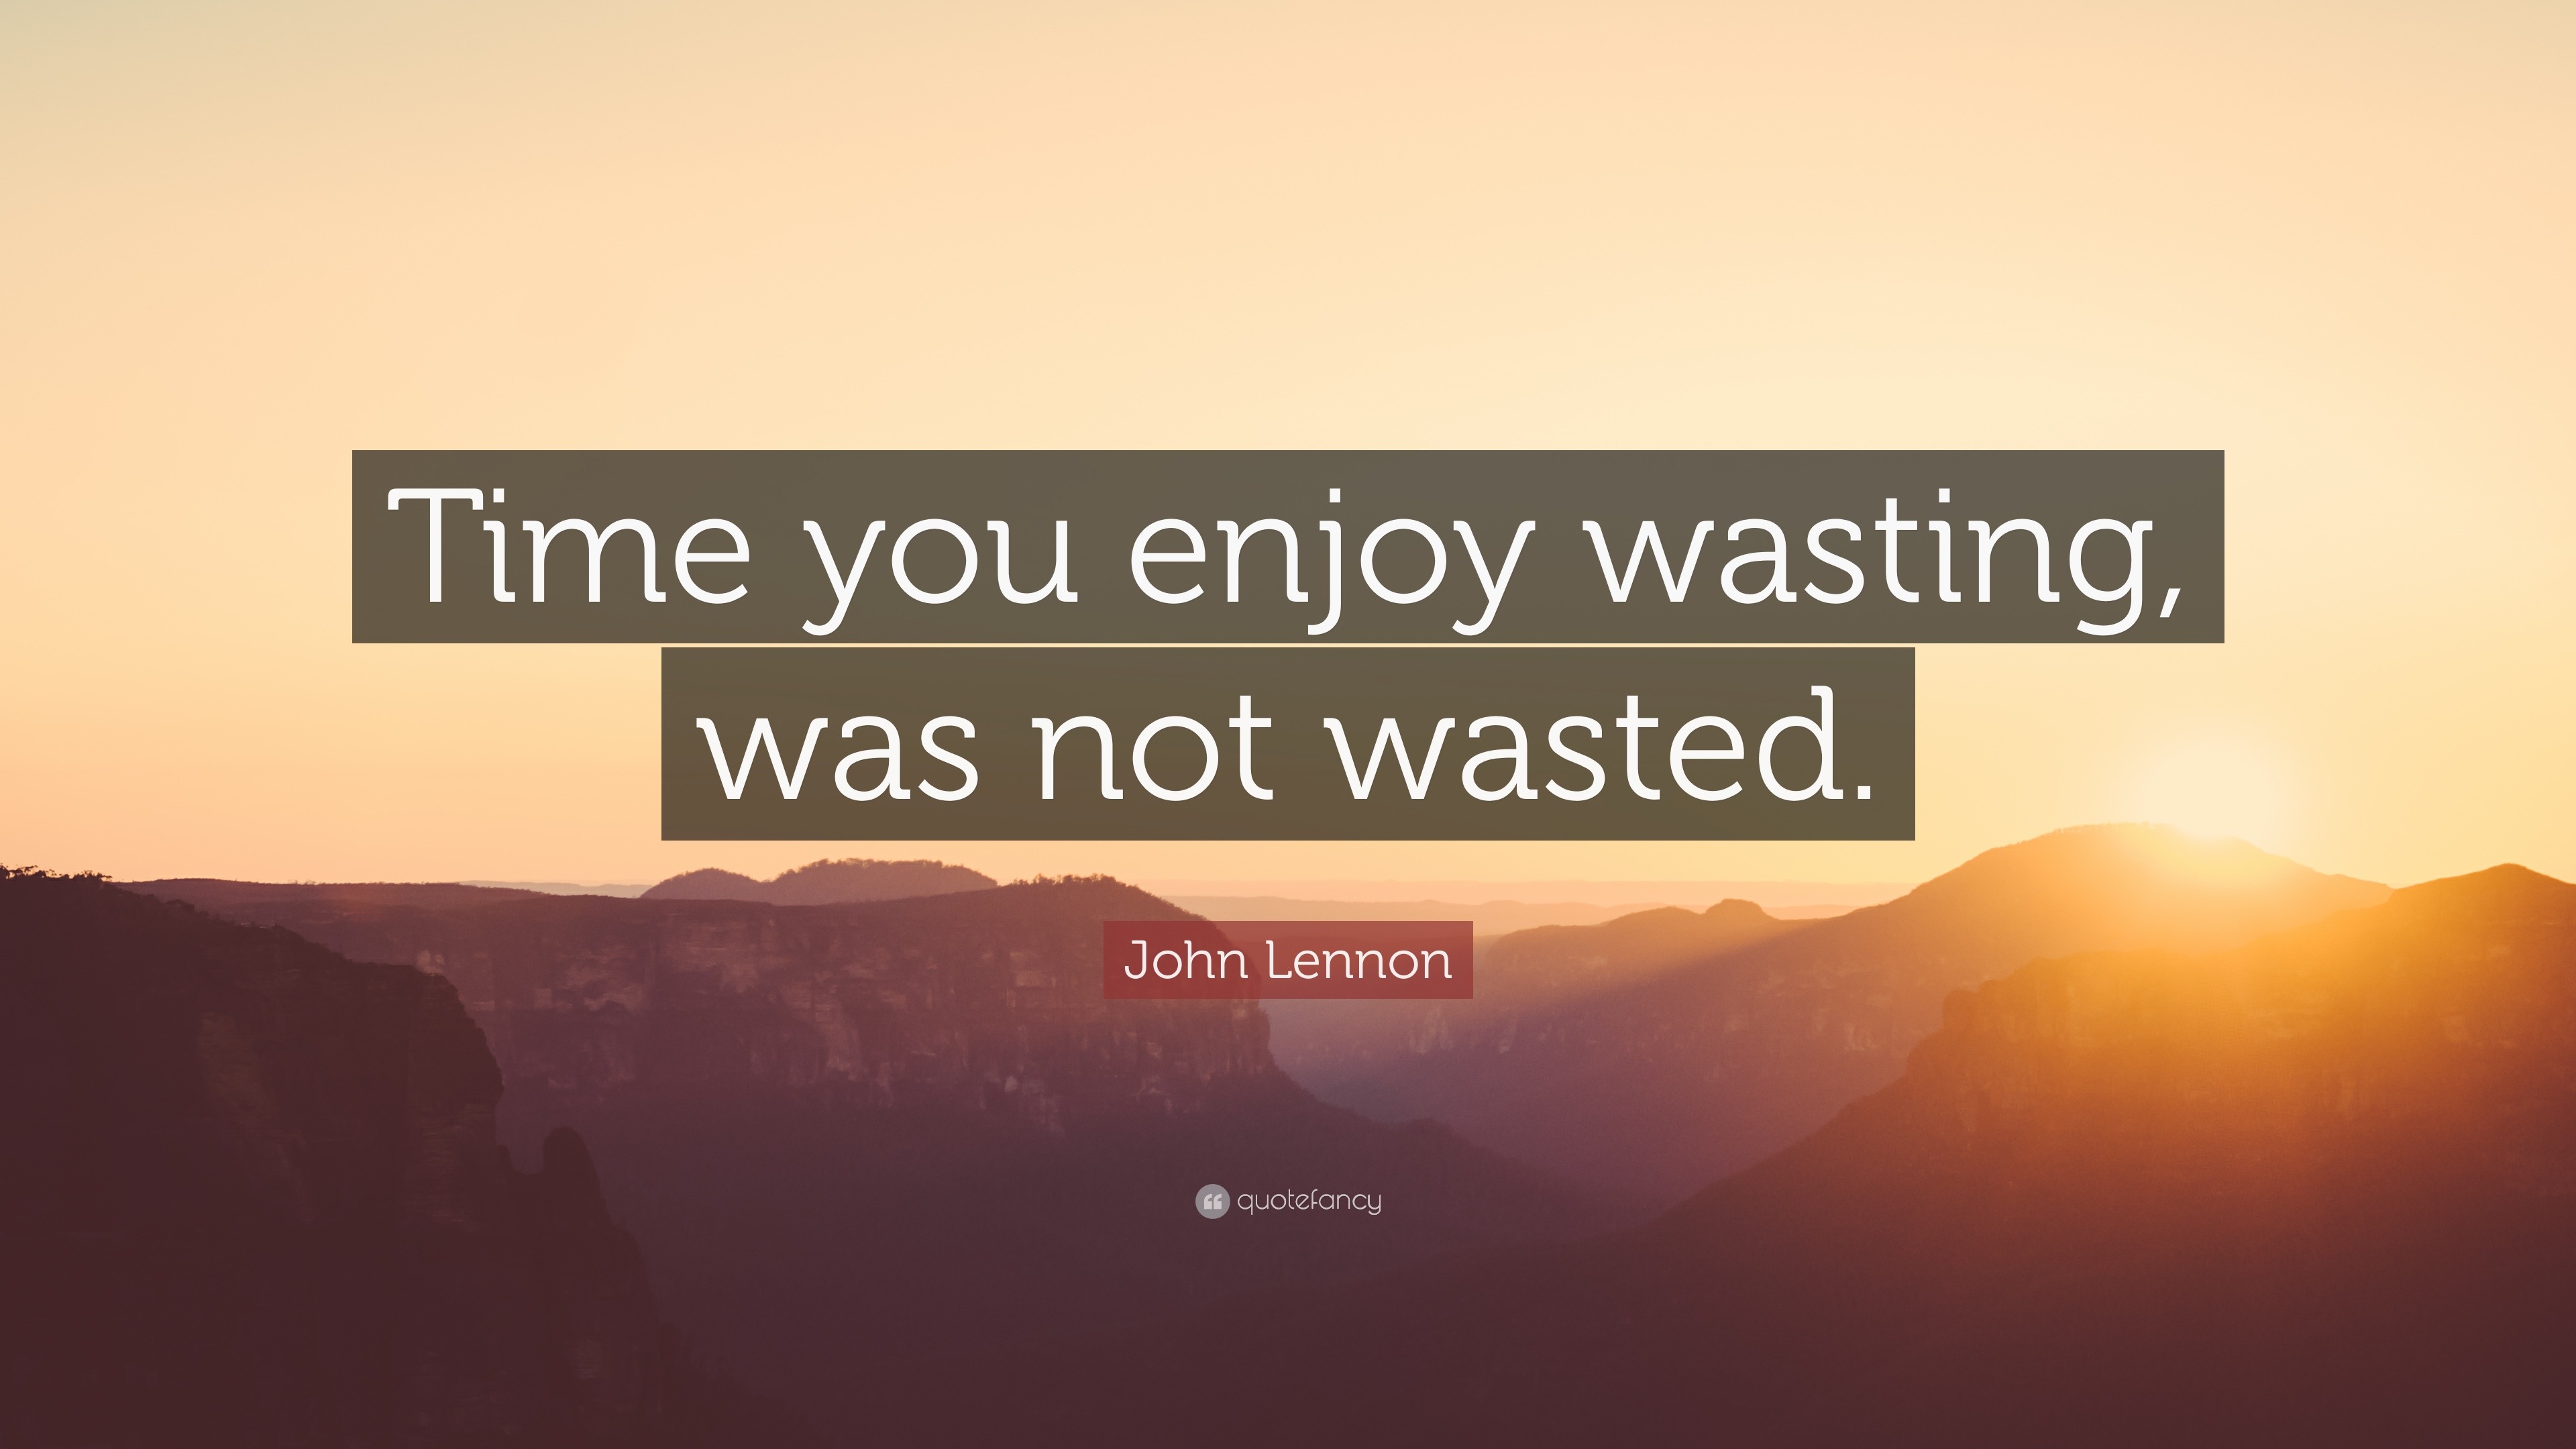 John Lennon Quote “time You Enjoy Wasting Was Not Wasted”